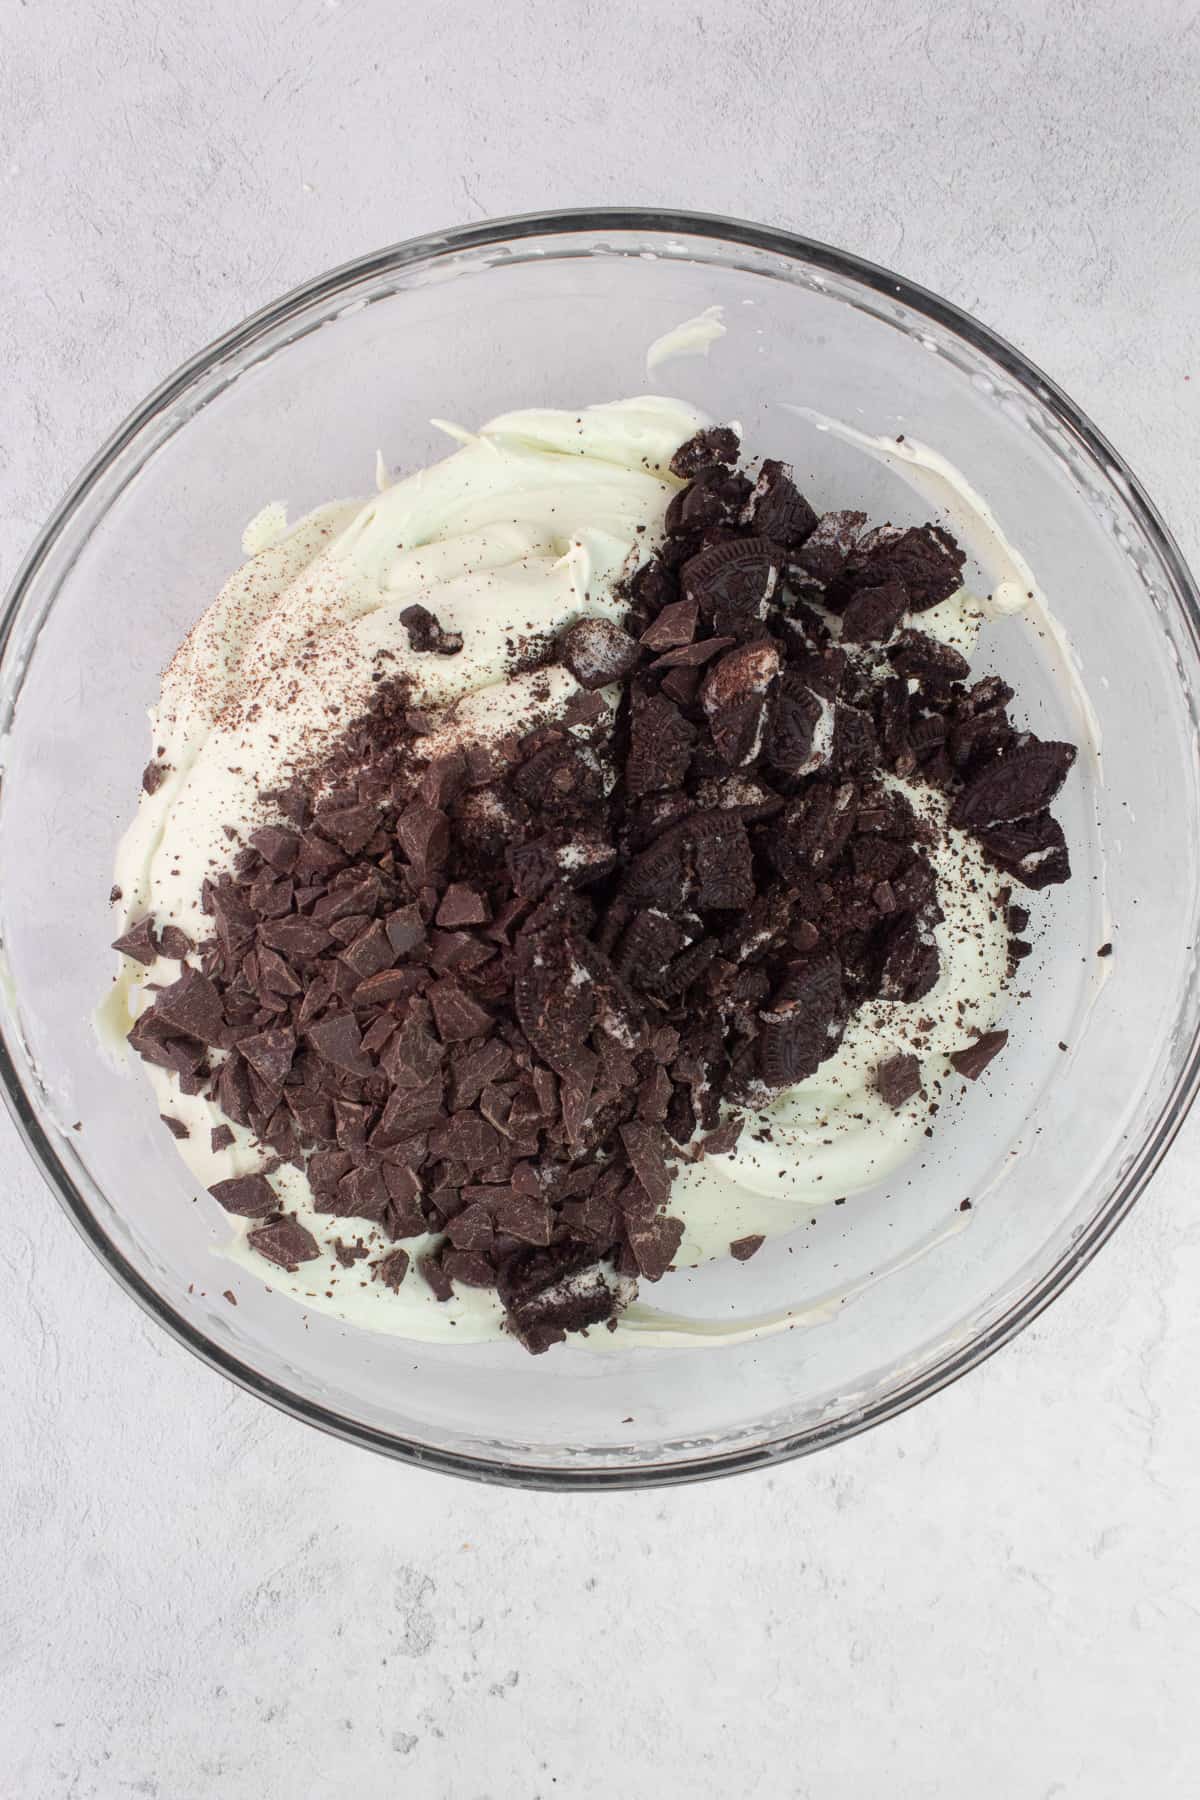 Chocolate chunks and crushed Oreo cookies added to whipped cream